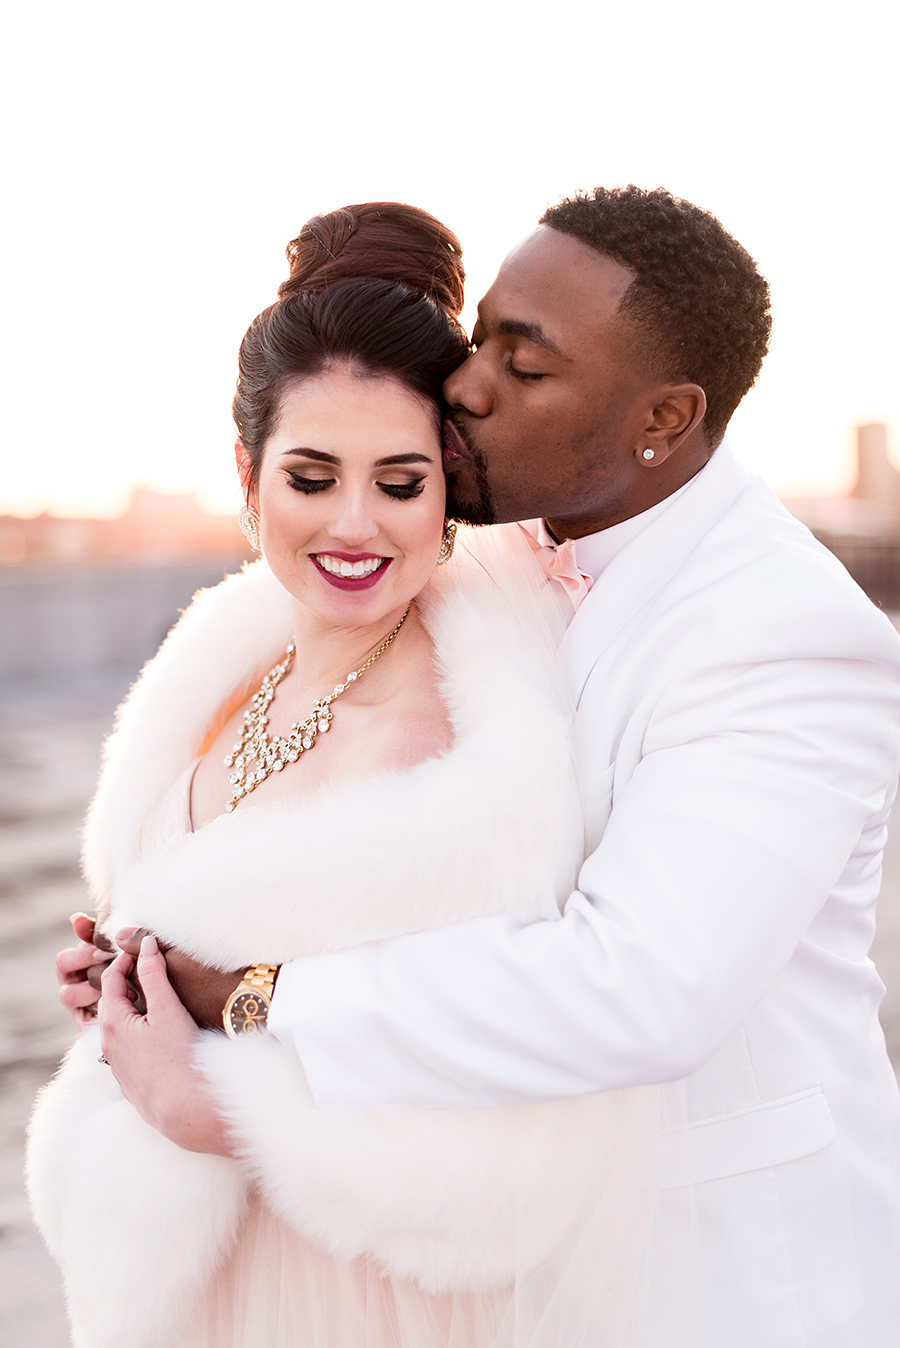 Bride & Groom Portraits on NEO Rooftop at Sunset by Ashley Fisher Photography